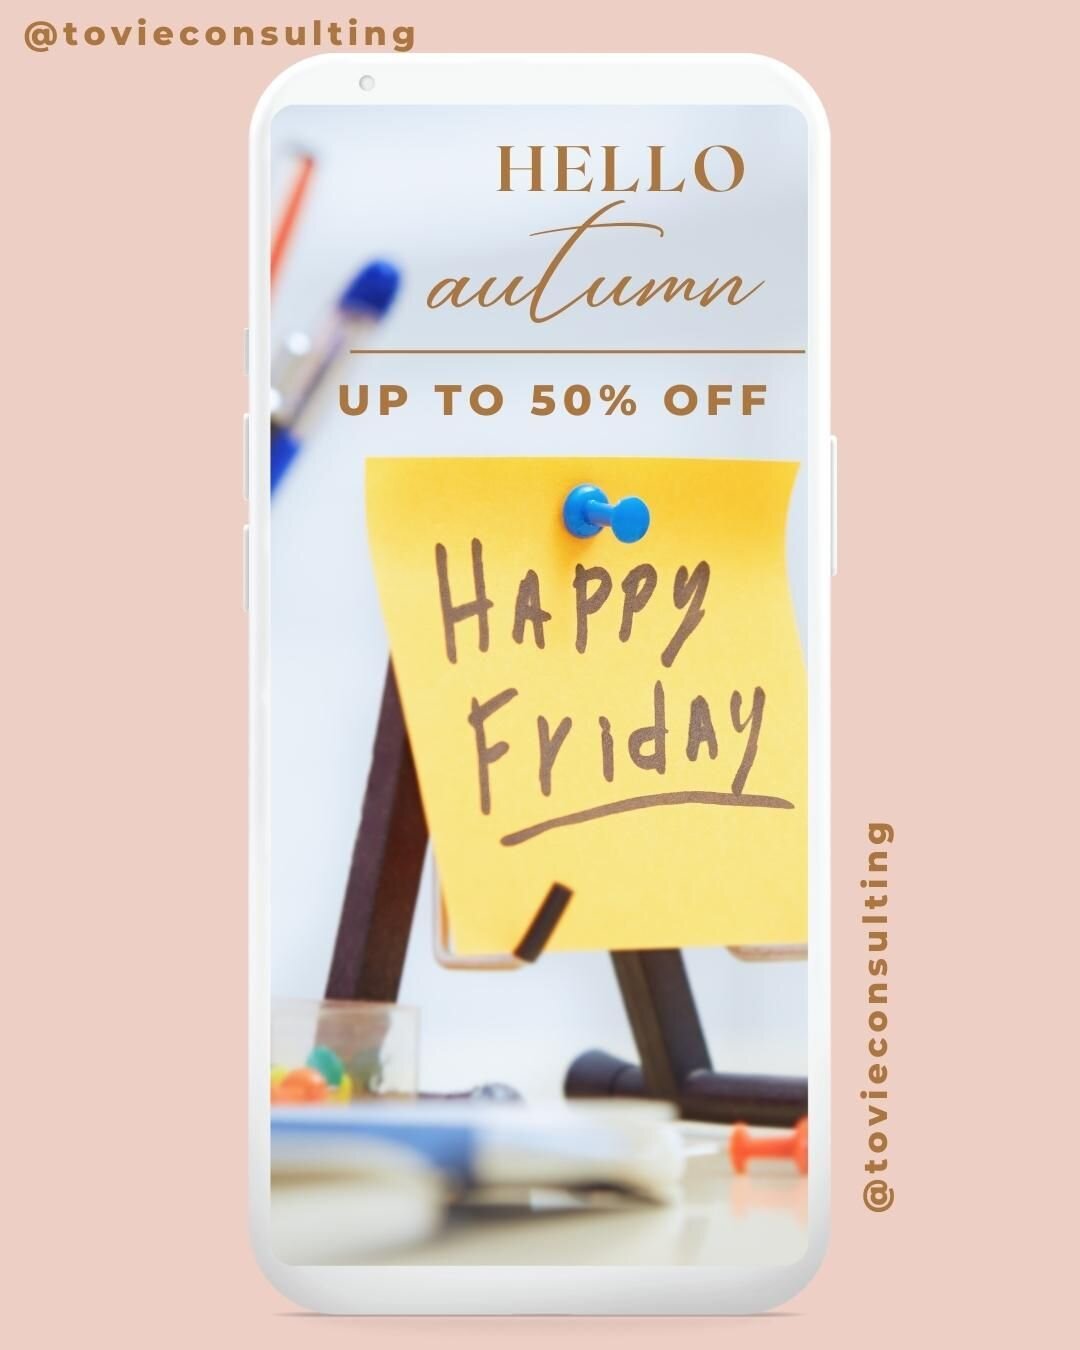 Happy FriYAY! We've made it through another week🥳. As a reward (and because we're just feeling fuzzy) we're doing a flash FriYAY 50% off sale for all resume services!! 
Book with us today using promo code &quot;FUZZY FRIYAY&quot;. This offer is only